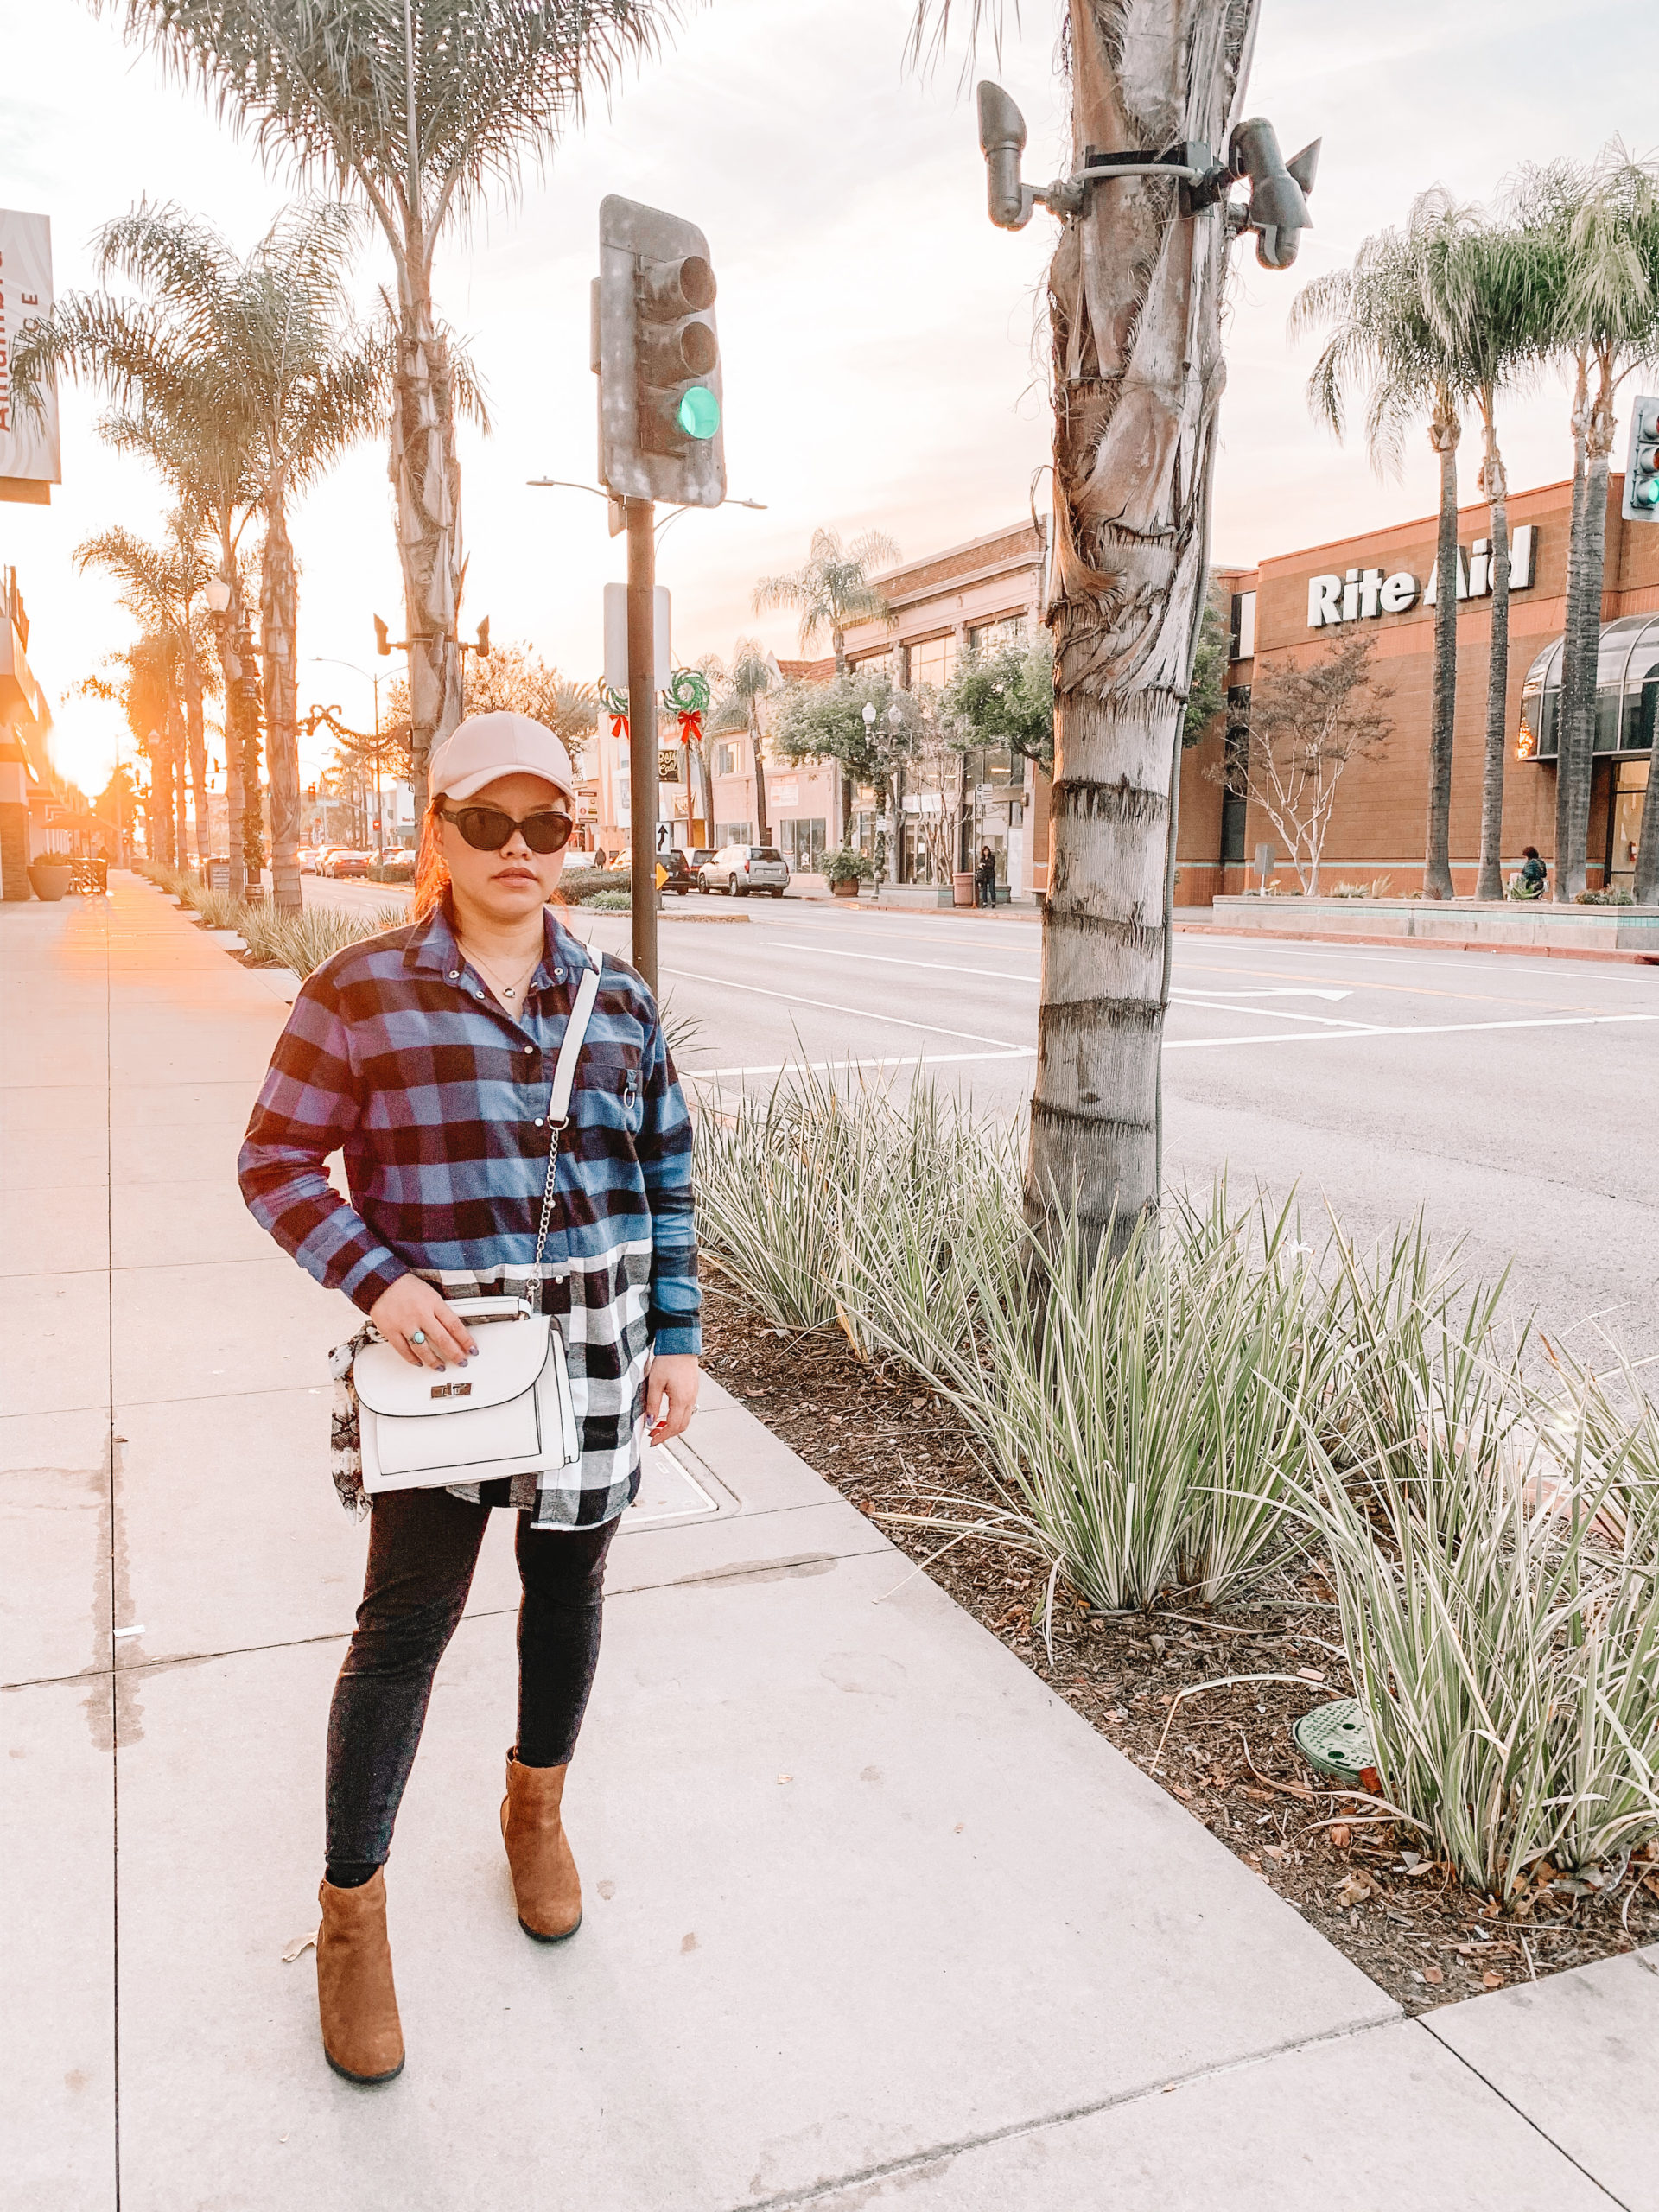 instagram-pslilyboutique-LA-fashion-blogger-Rite-Aid-Store-H&M-blue-and-white-color-block-long-flannel-shirt-brown-ugg-boots-winter-2020-outfit-ideas-editorial-photography-amazon-influencer-IMG_2404, Instagram: @pslilyboutique, Pinterest, Los Angeles fashion blogger, top fashion blog, best fashion blog, fashion & personal style blog, travel blog, lifestyle blogger, travel blogger, LA fashion blogger, chicago based fashion blogger, fashion influencer, luxury fashion, luxury travel, luxury influencer, luxury lifestyle, lifestyle blog, amazon influencer, lifestyle influencer